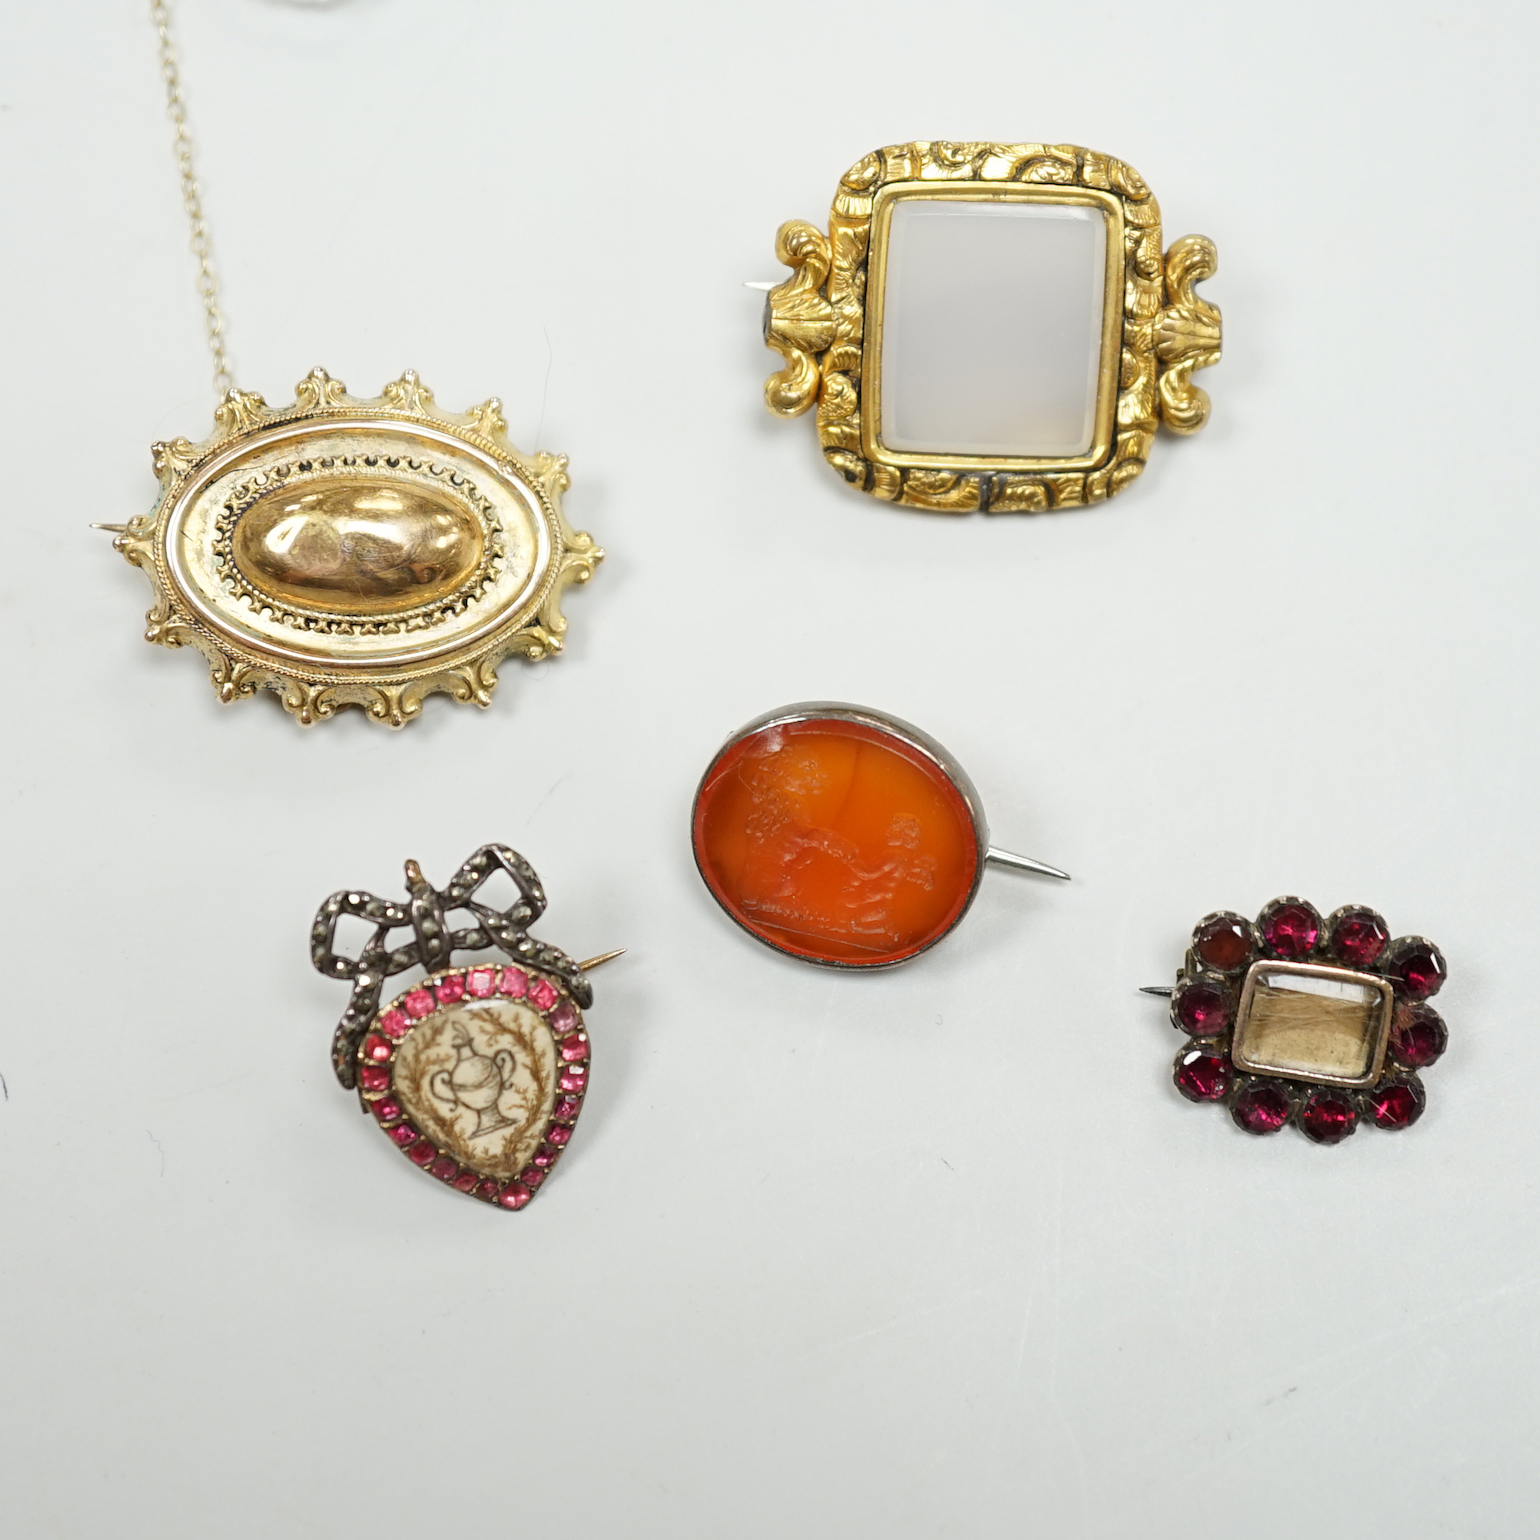 Five assorted antique brooches, comprising an early 19th century foiled ruby and hair work heart shaped brooch, 2.25cm, an early 19th century foiled garnet memorial brooch, 1.75cm, a Victorian unmarked gold oval brooch, 